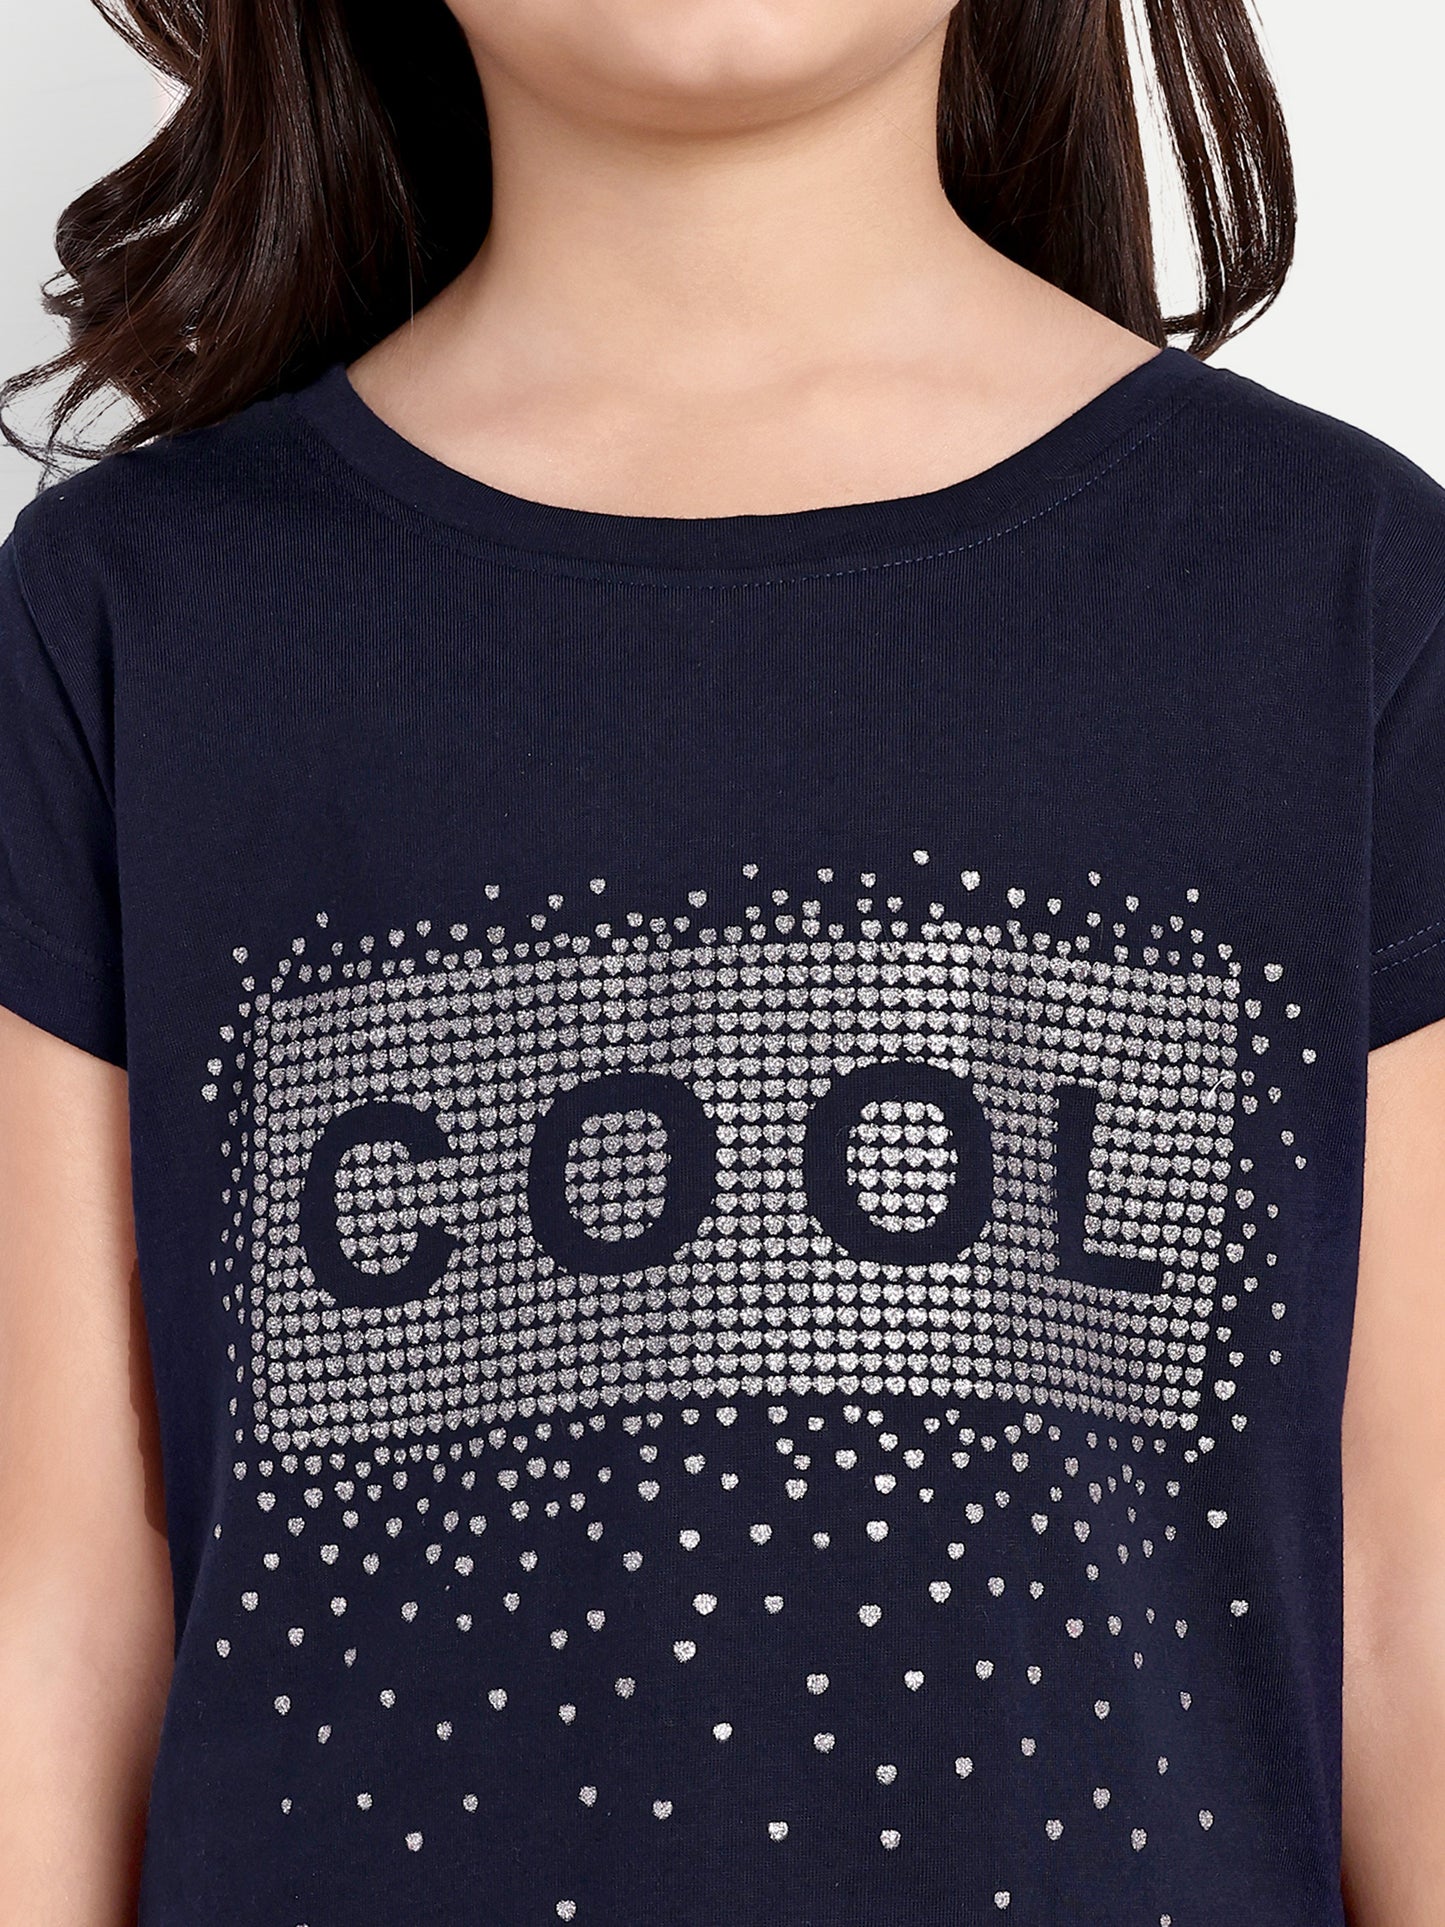 Pampolina  Girls Sequined Printed Top- Navy